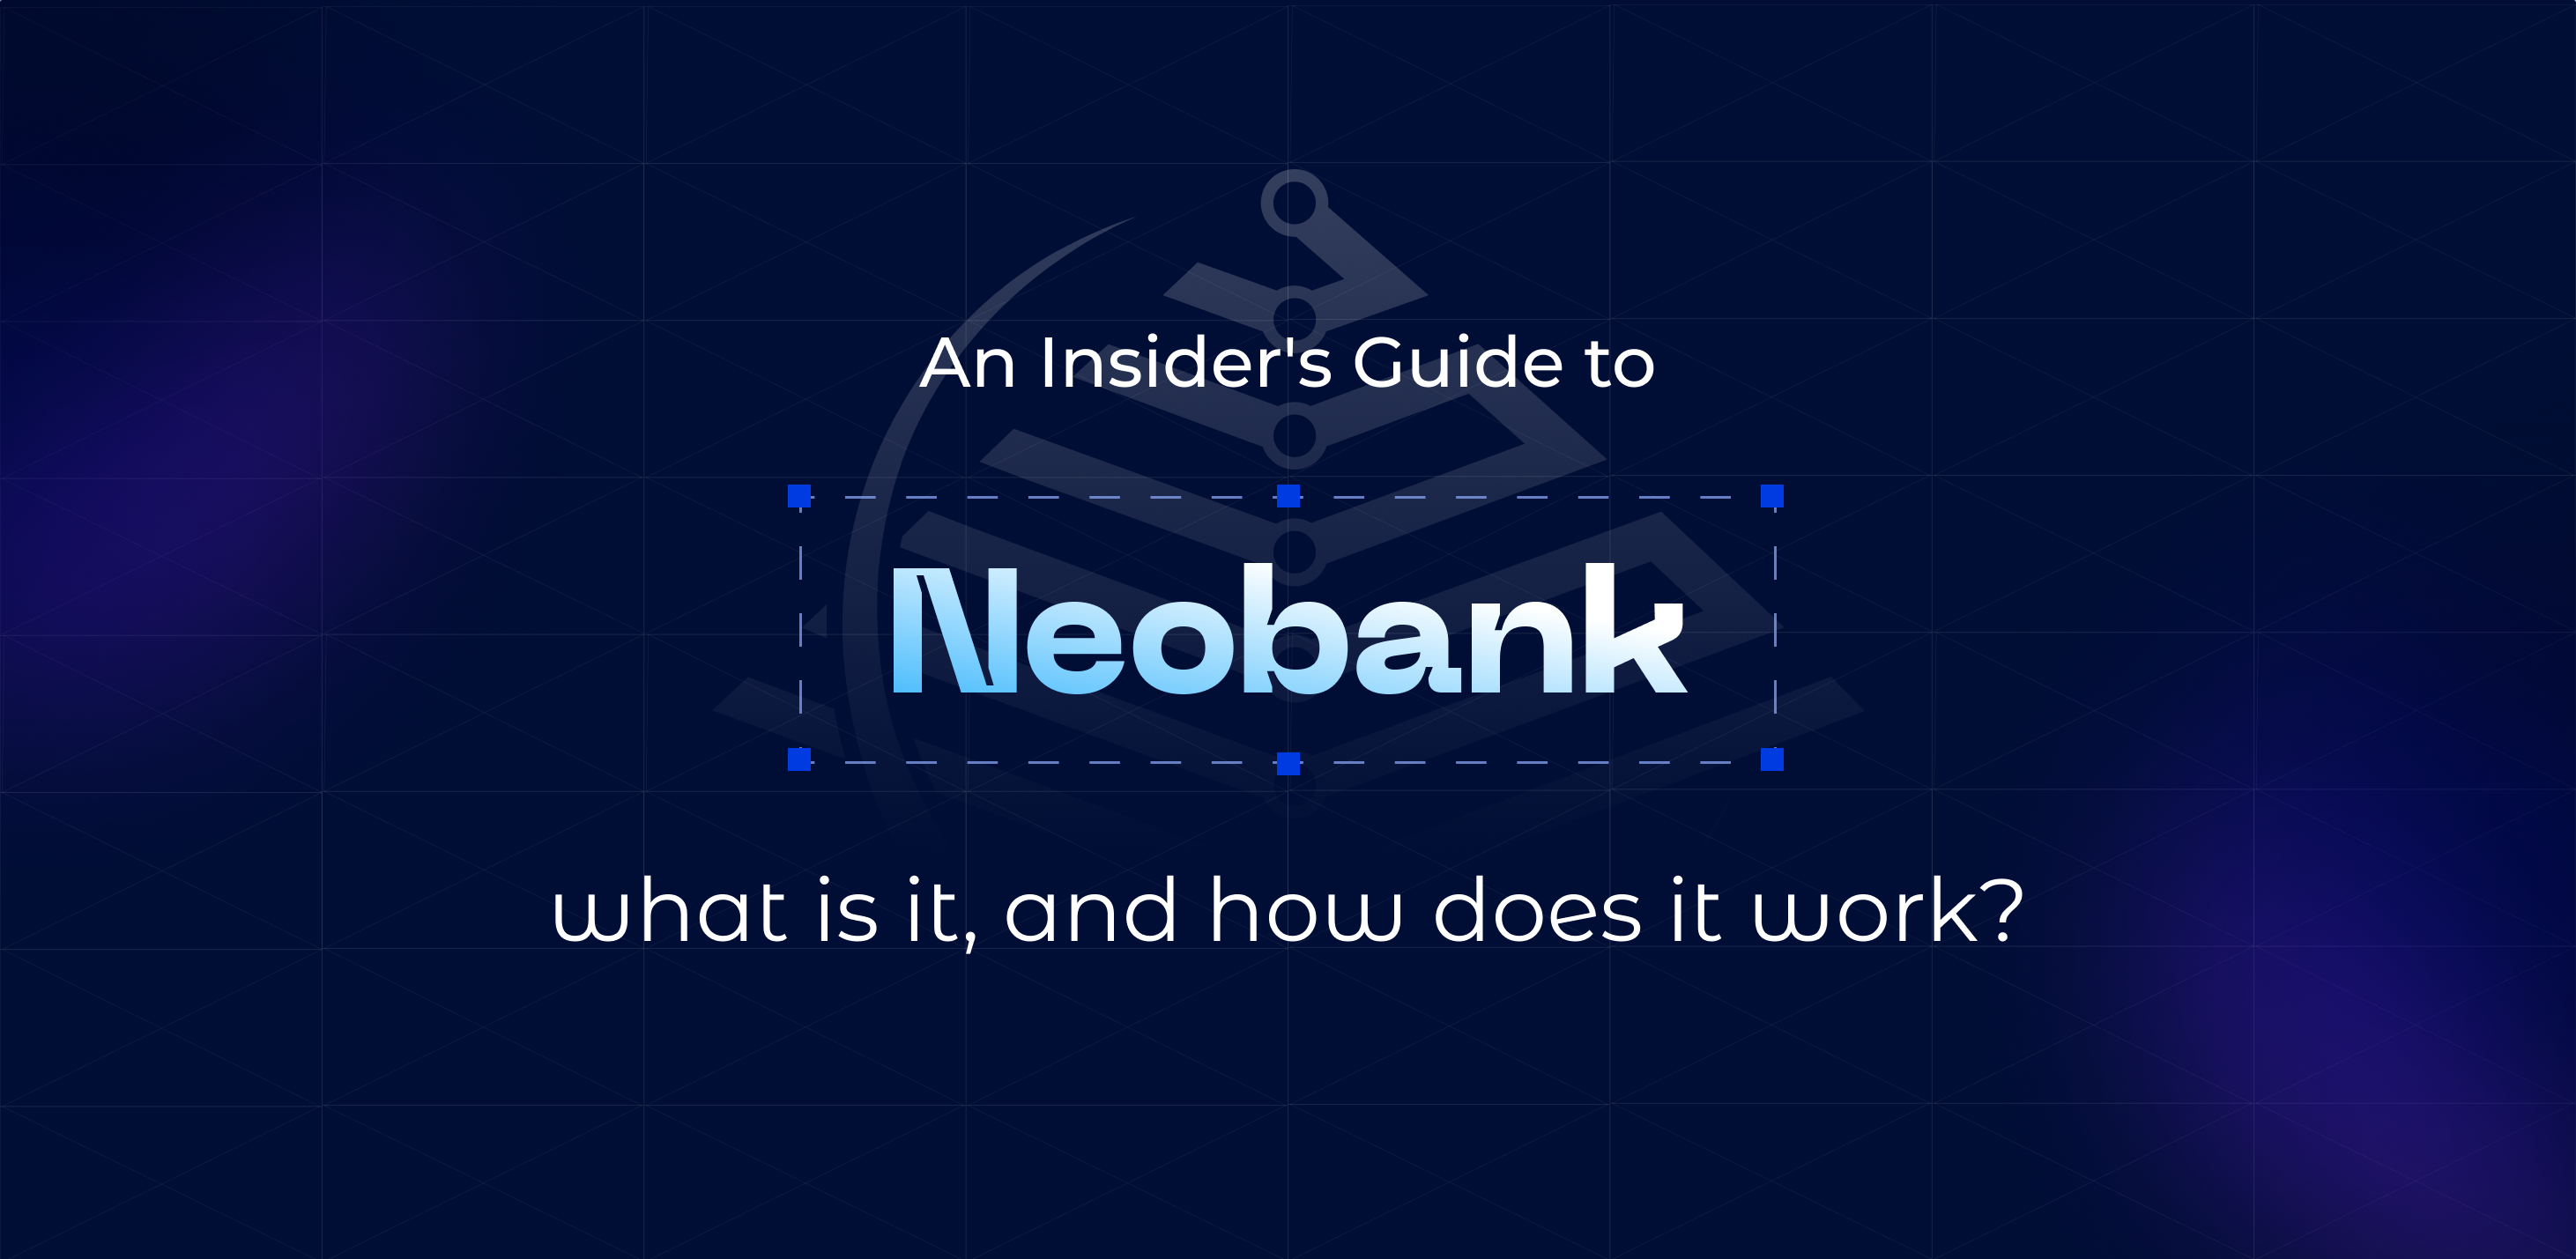 An Insider’s Guide to Neobanks: what is it, and how does it work?